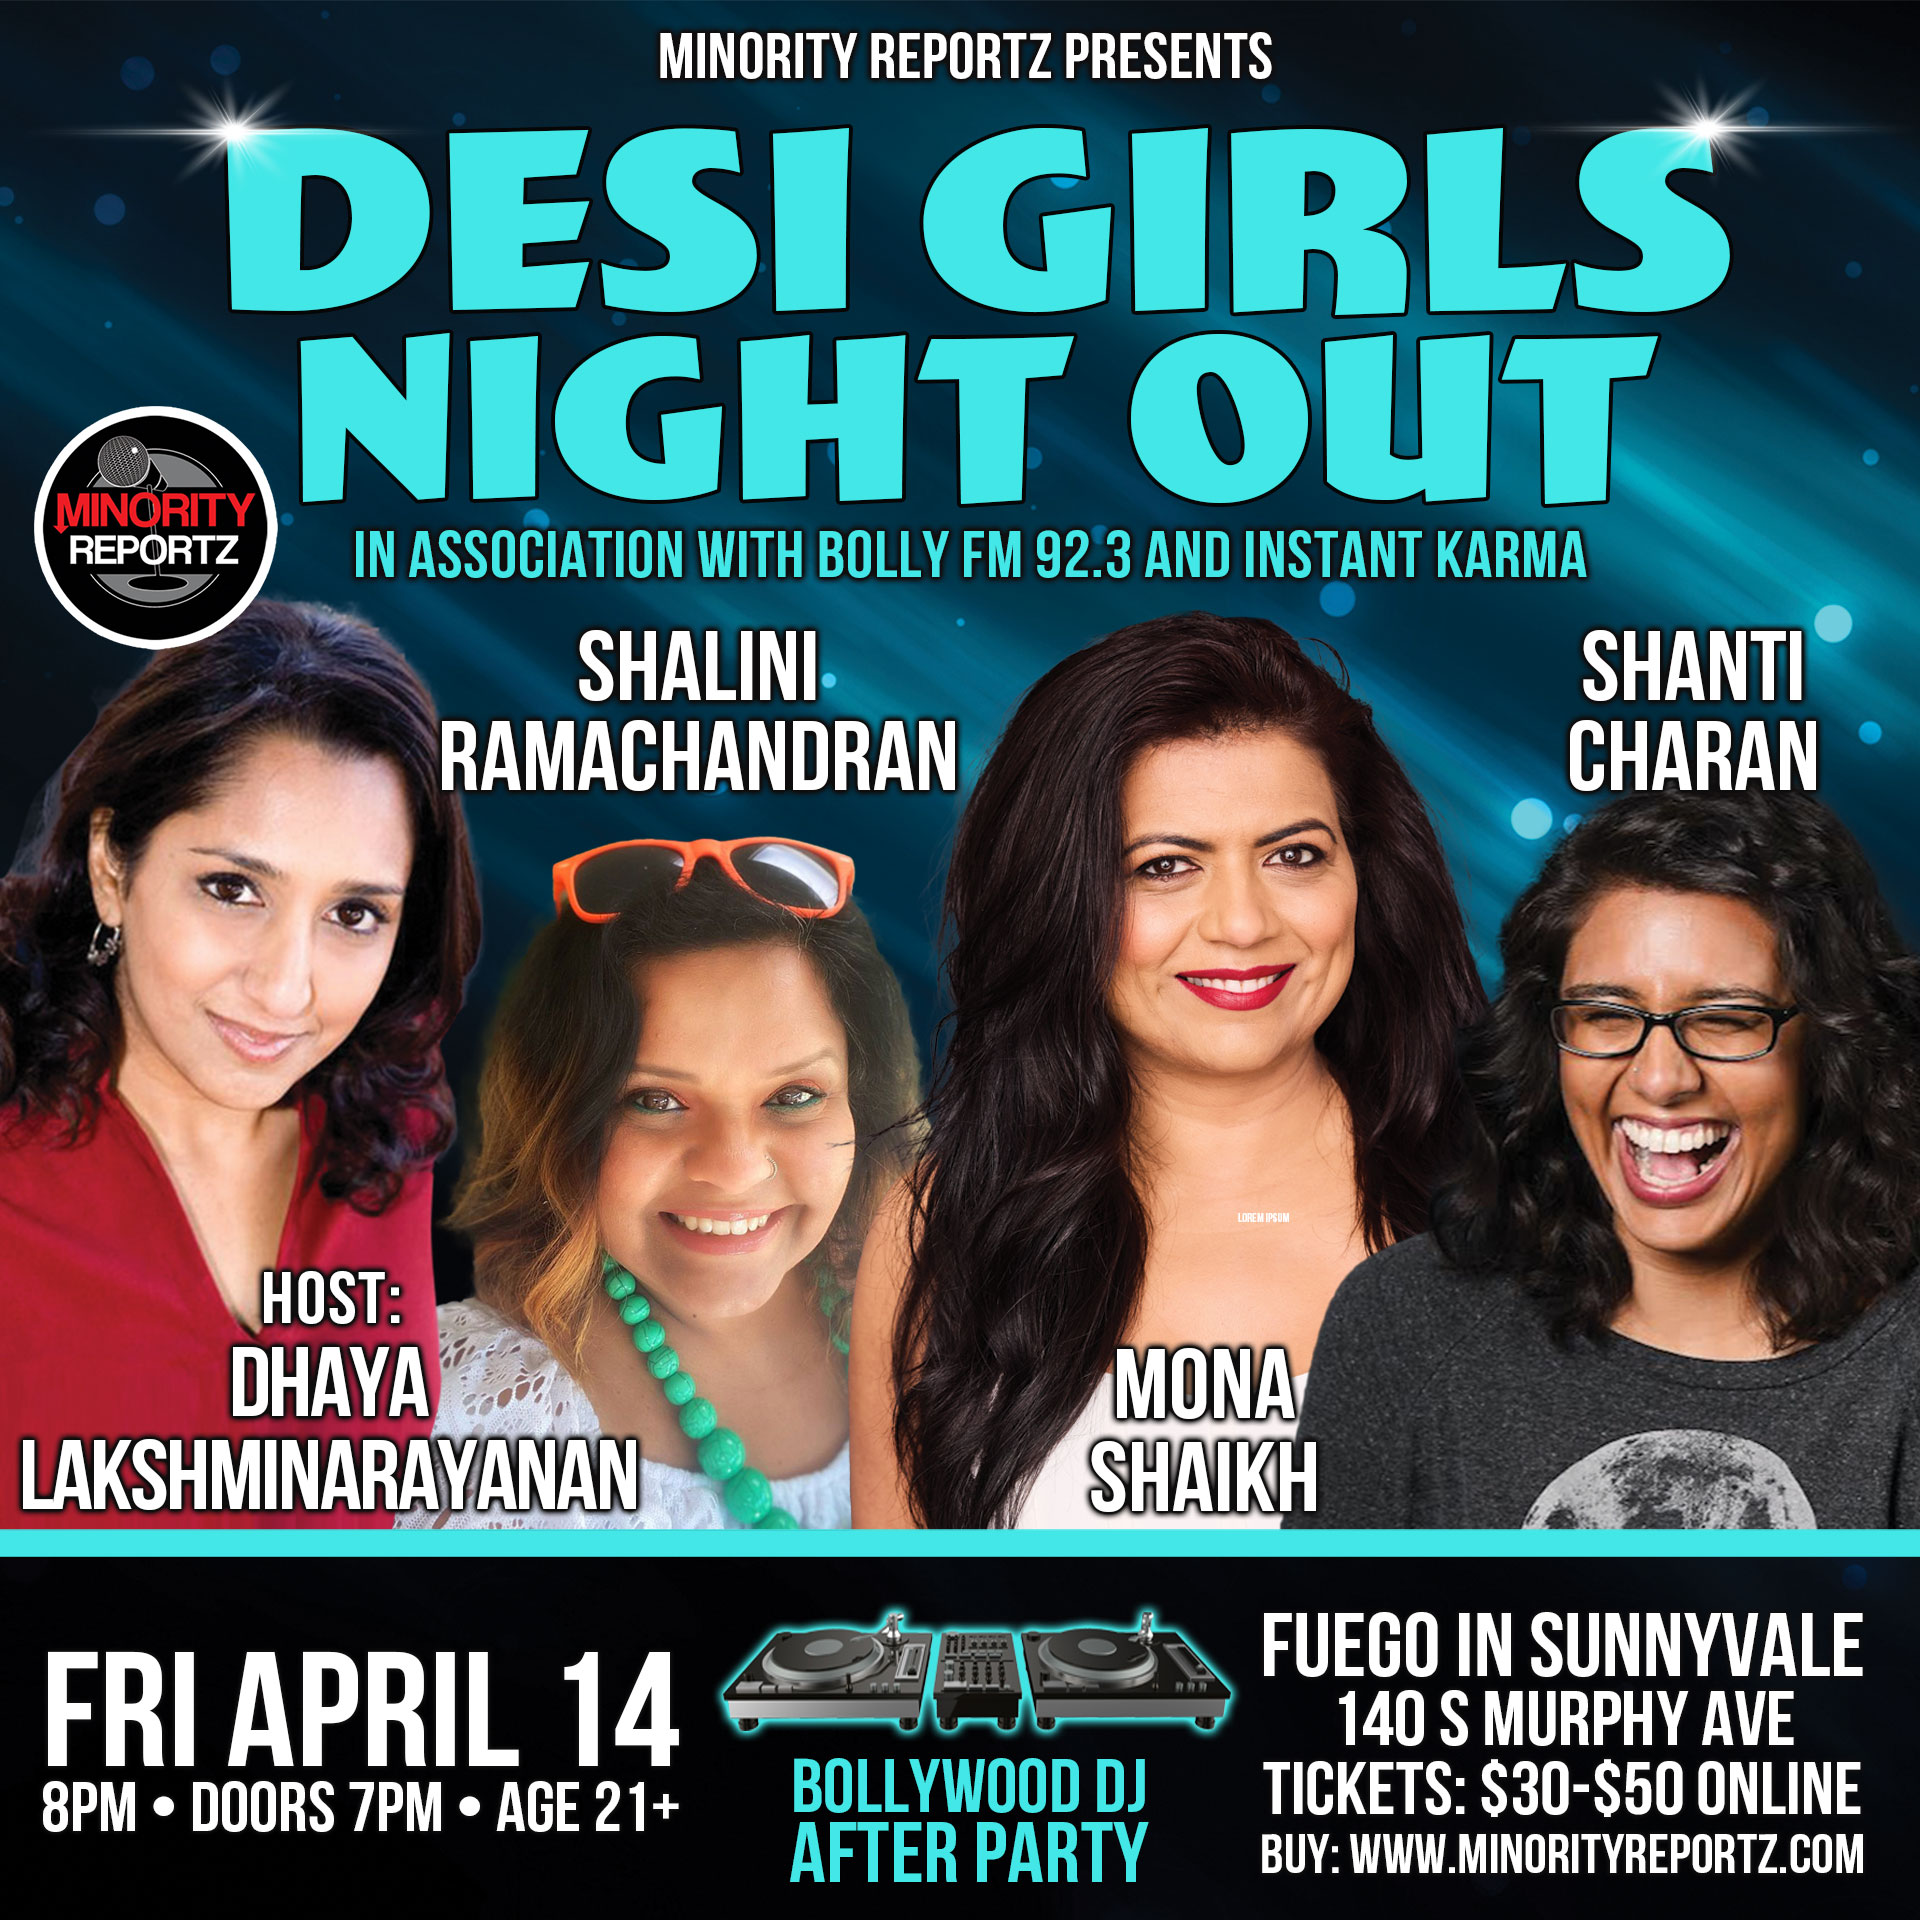 MONA SHAIKH presents DESI GIRLS NIGHT OUT COMEDY SHOW WITH HOST DHAYA LAKSHMINARAYANAN (The Moth), MONA SHAIKH (Producer of Minority Reportz), SHANTI CHARAN (Punchline), SURPRISE GUEST+ BOLLYWOOD DJ AFTER PARTY!